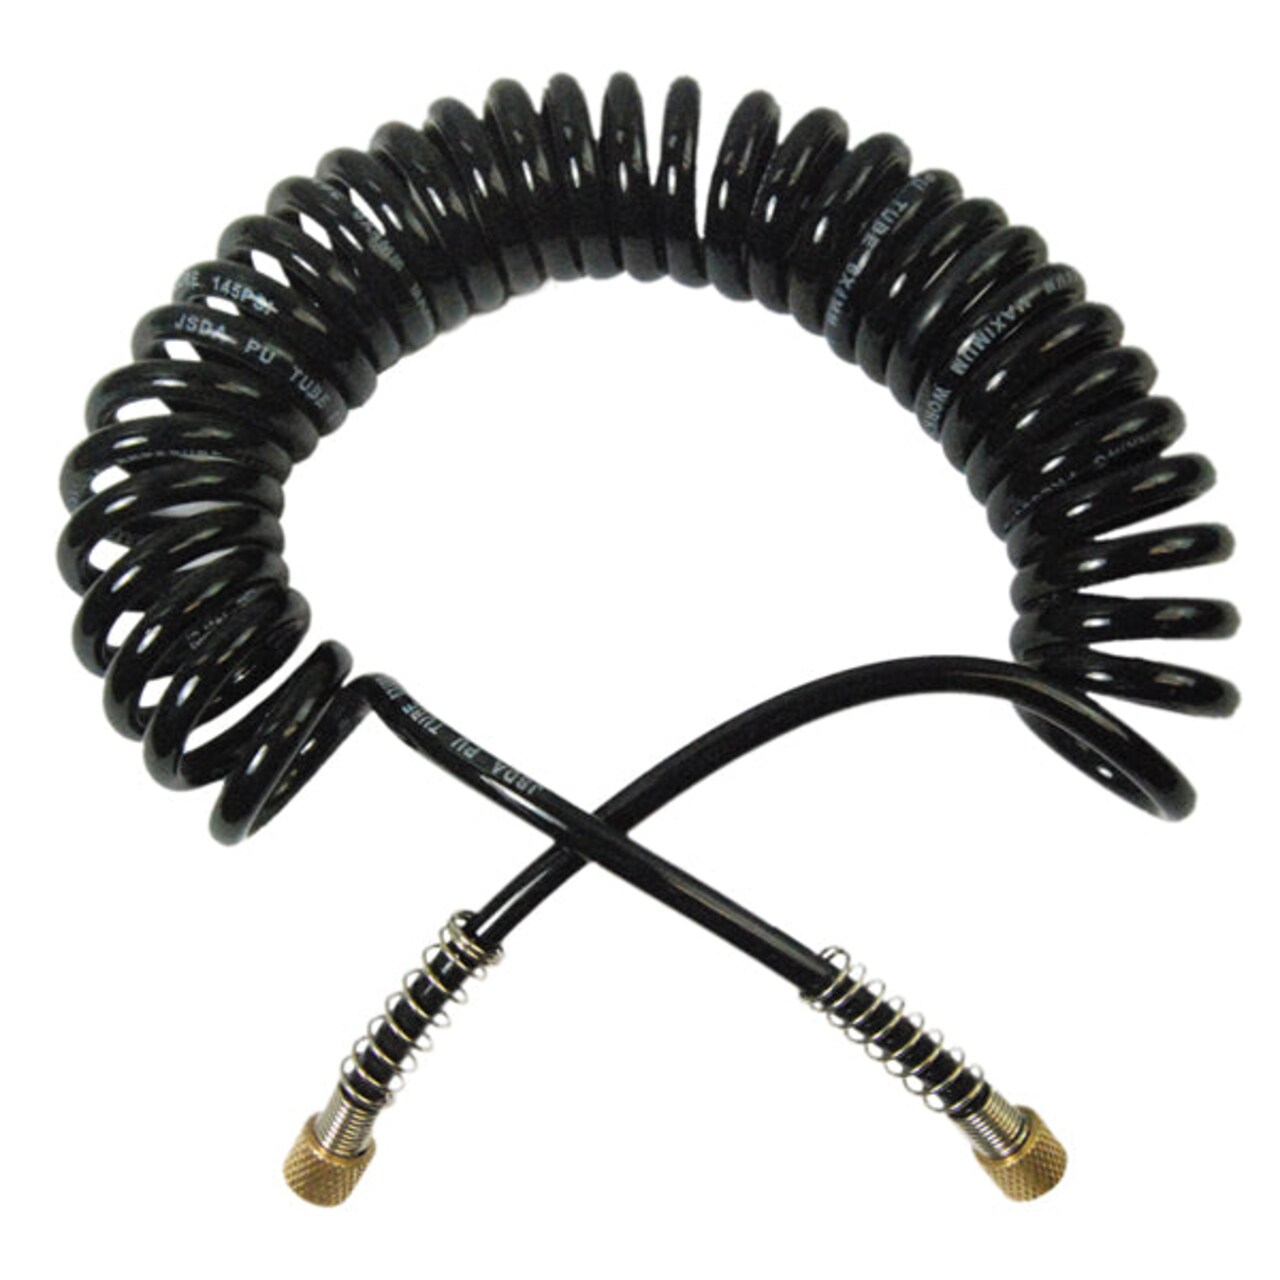 10' Recoil Airbrush Air Hose with Standard 1/8 Size Fittings on